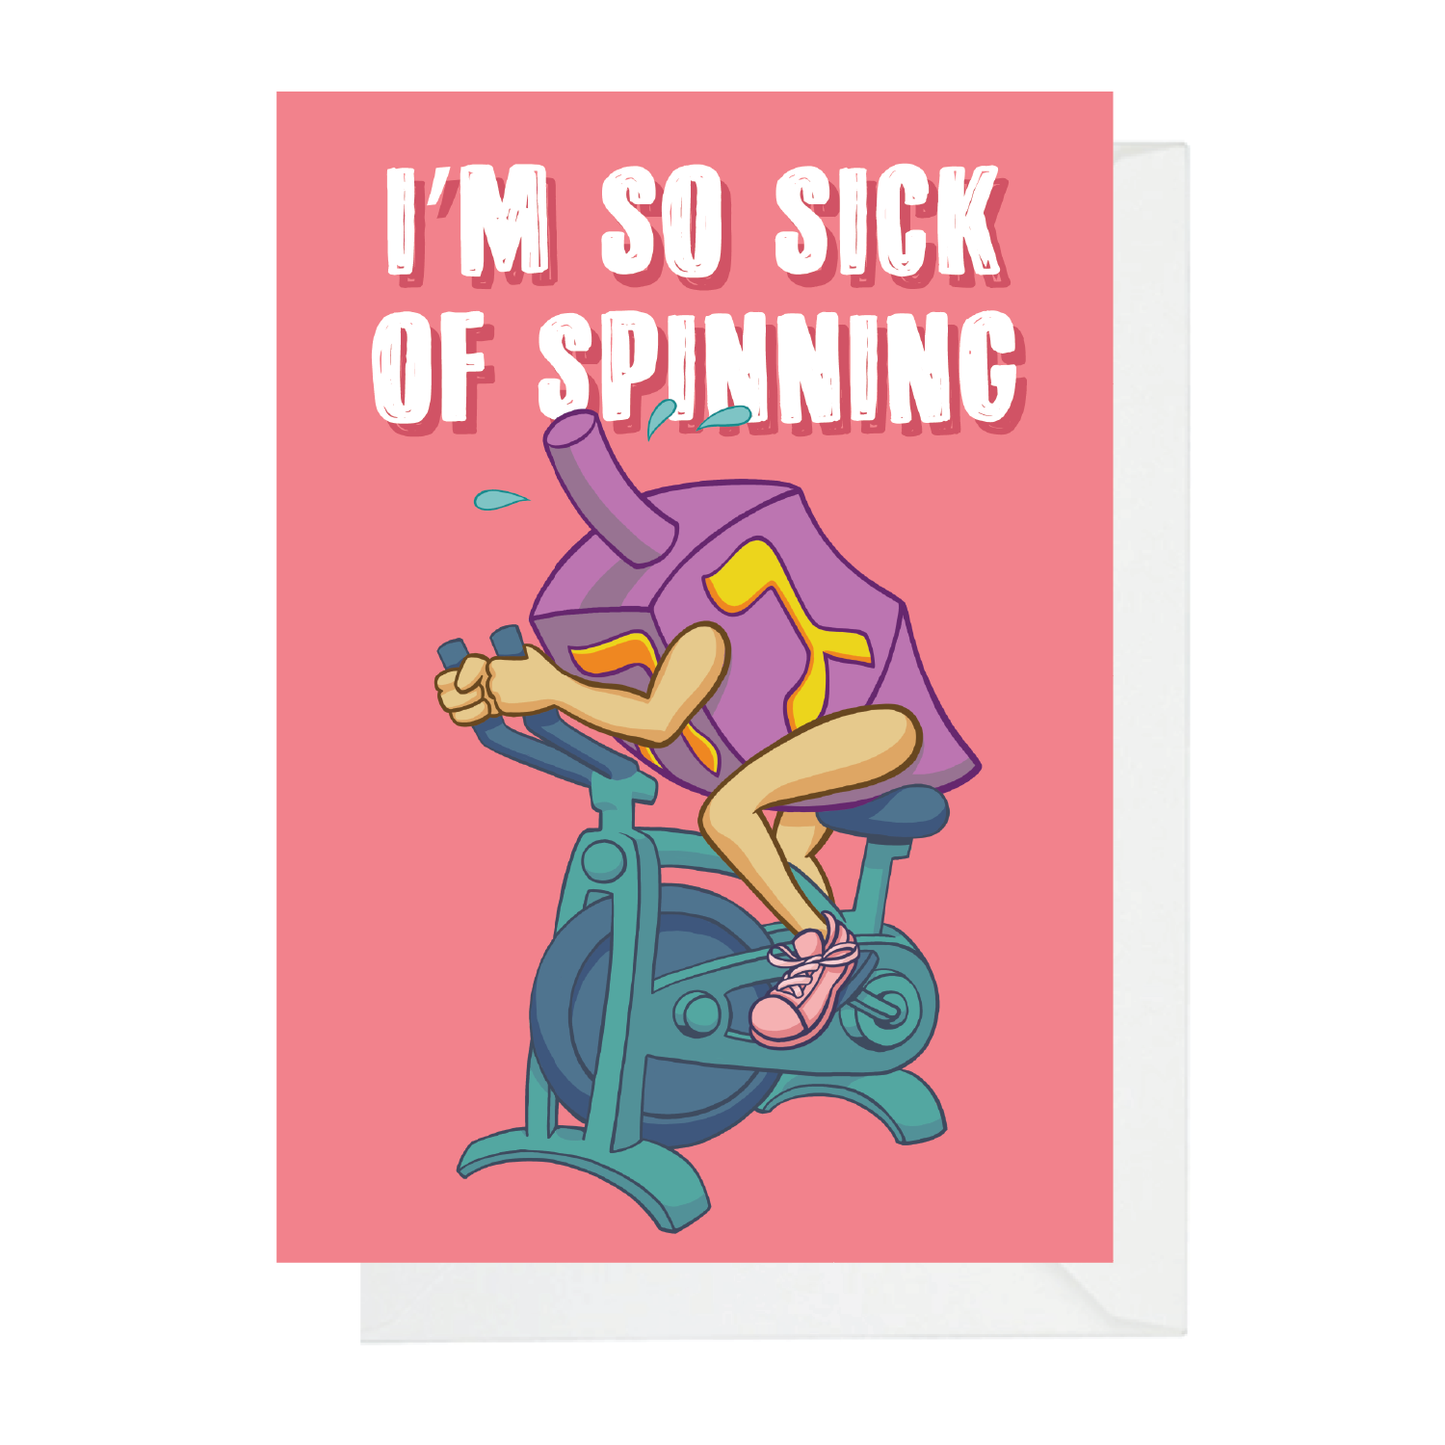 I'm so sick of spinning - Funny Hanukkah card from Menschions